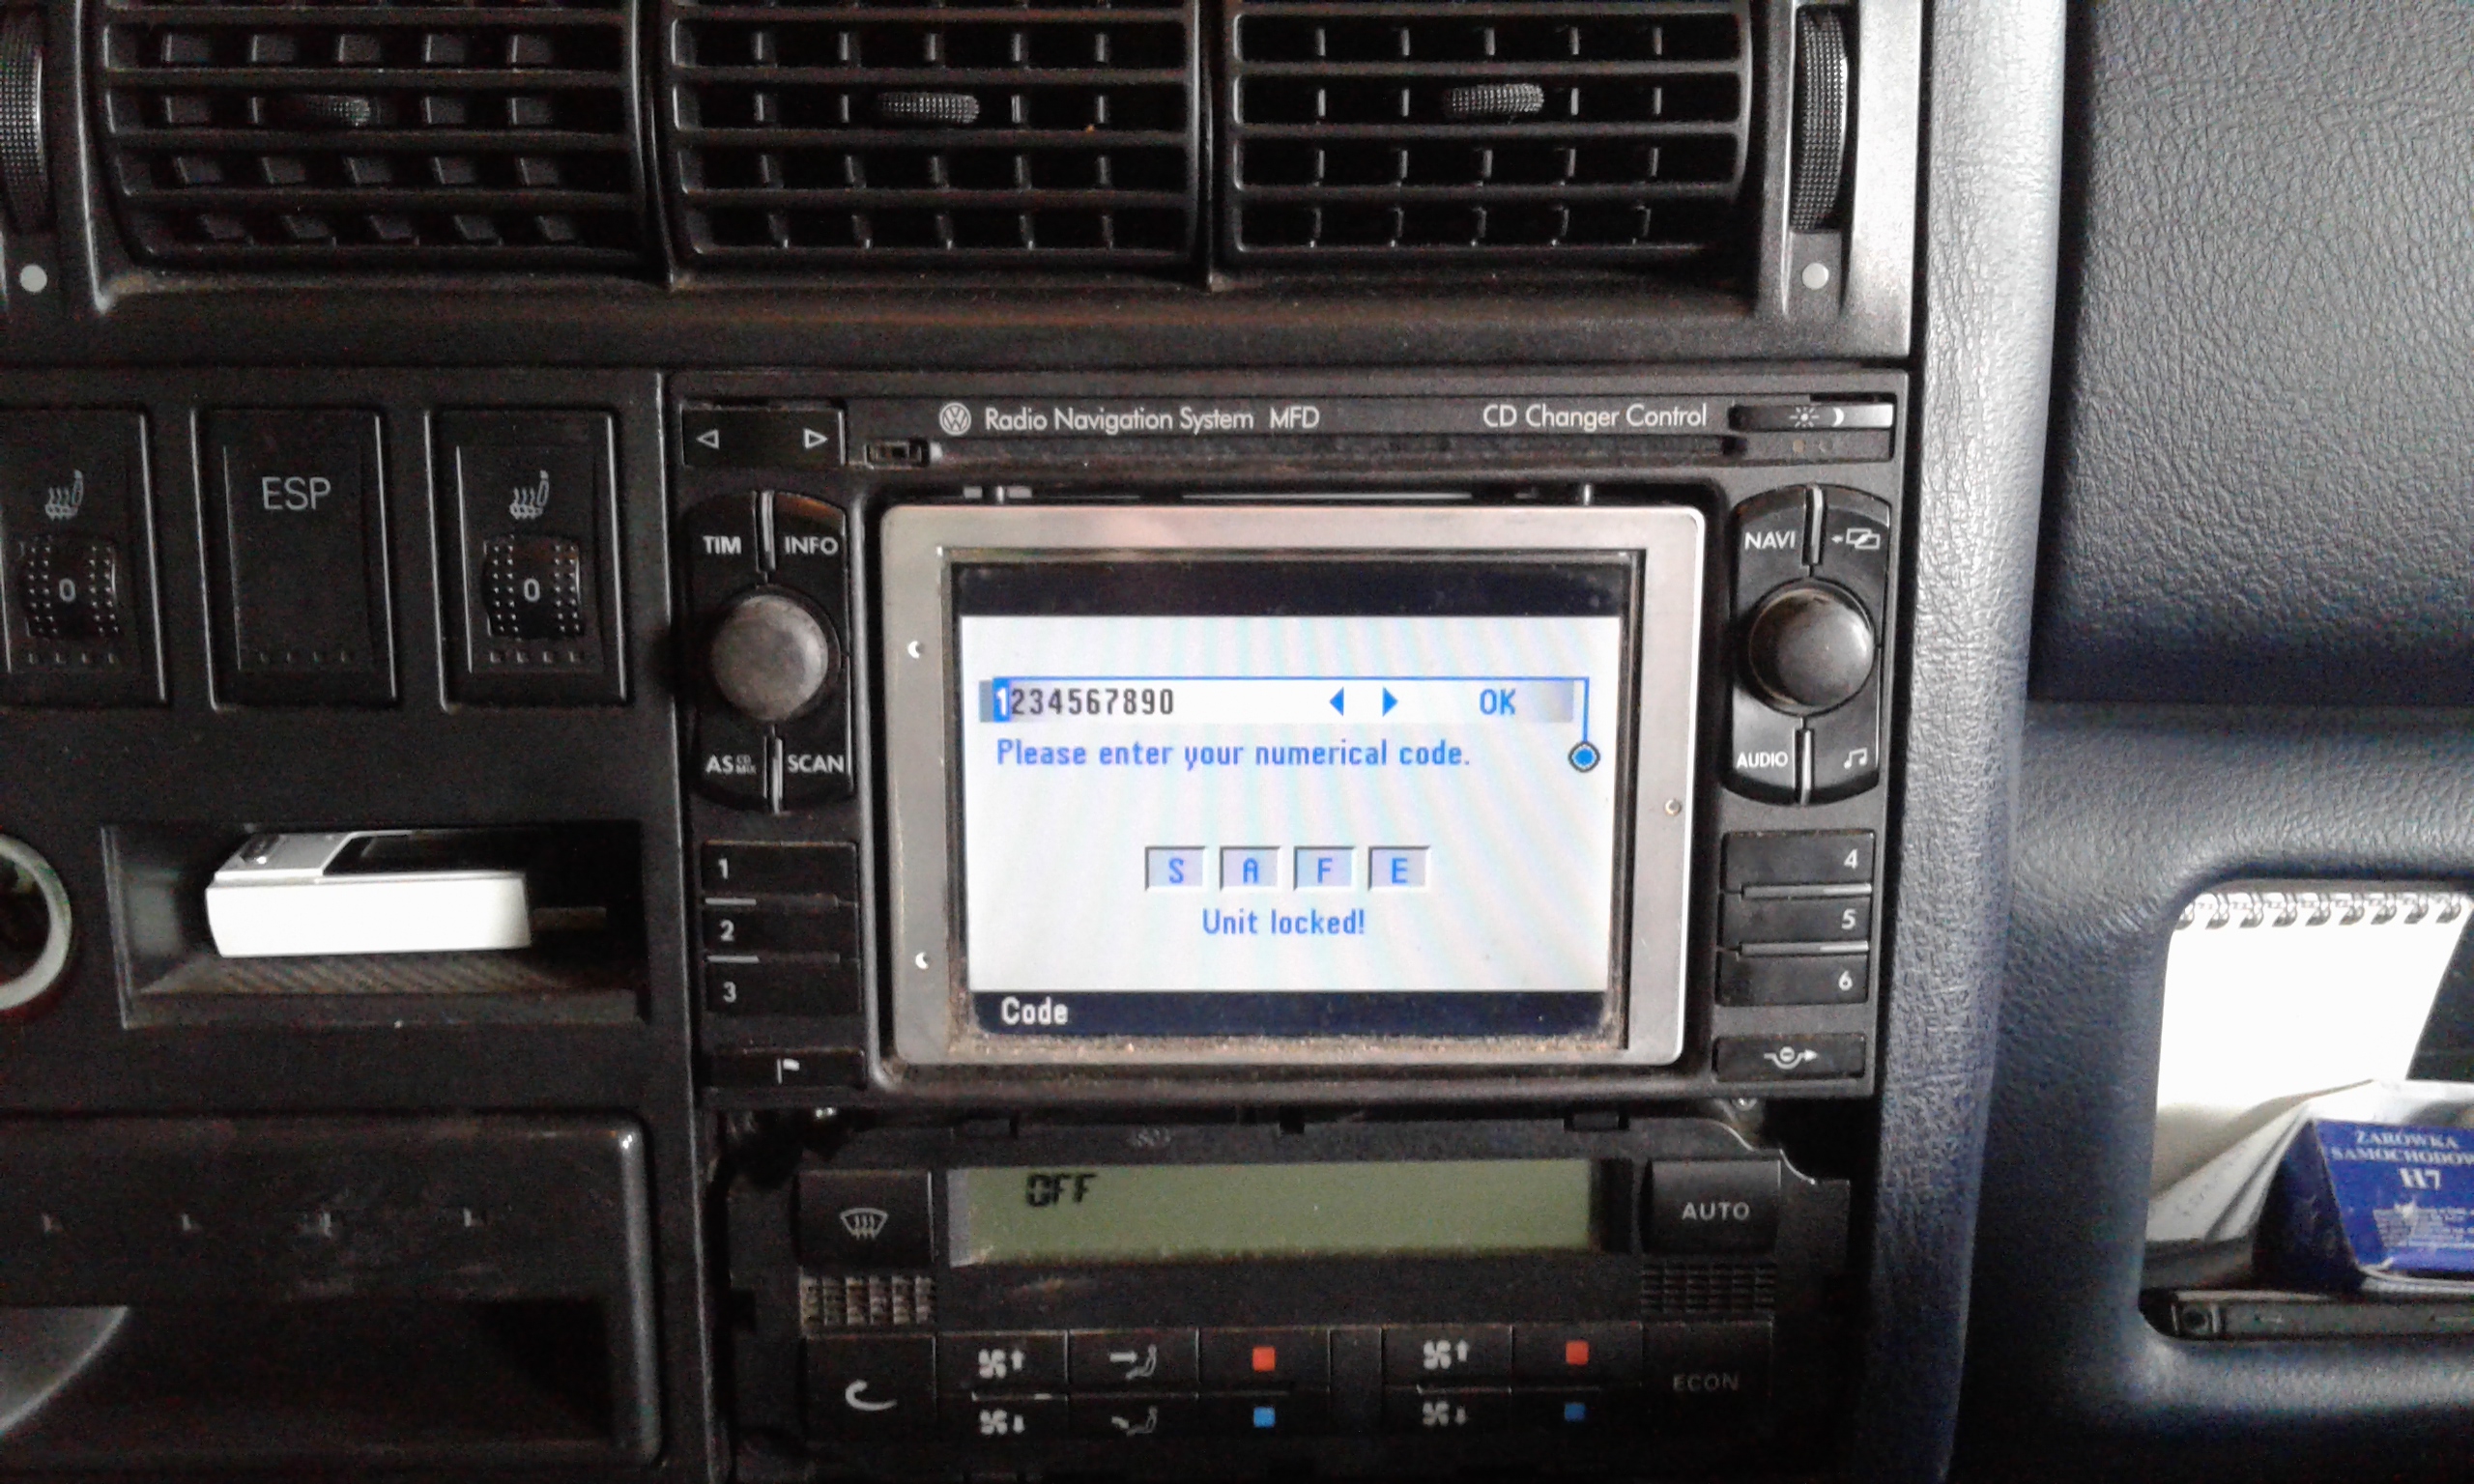 Unlocking the Navigarion System MFD Radio in a 2001 VW T4 Methods and